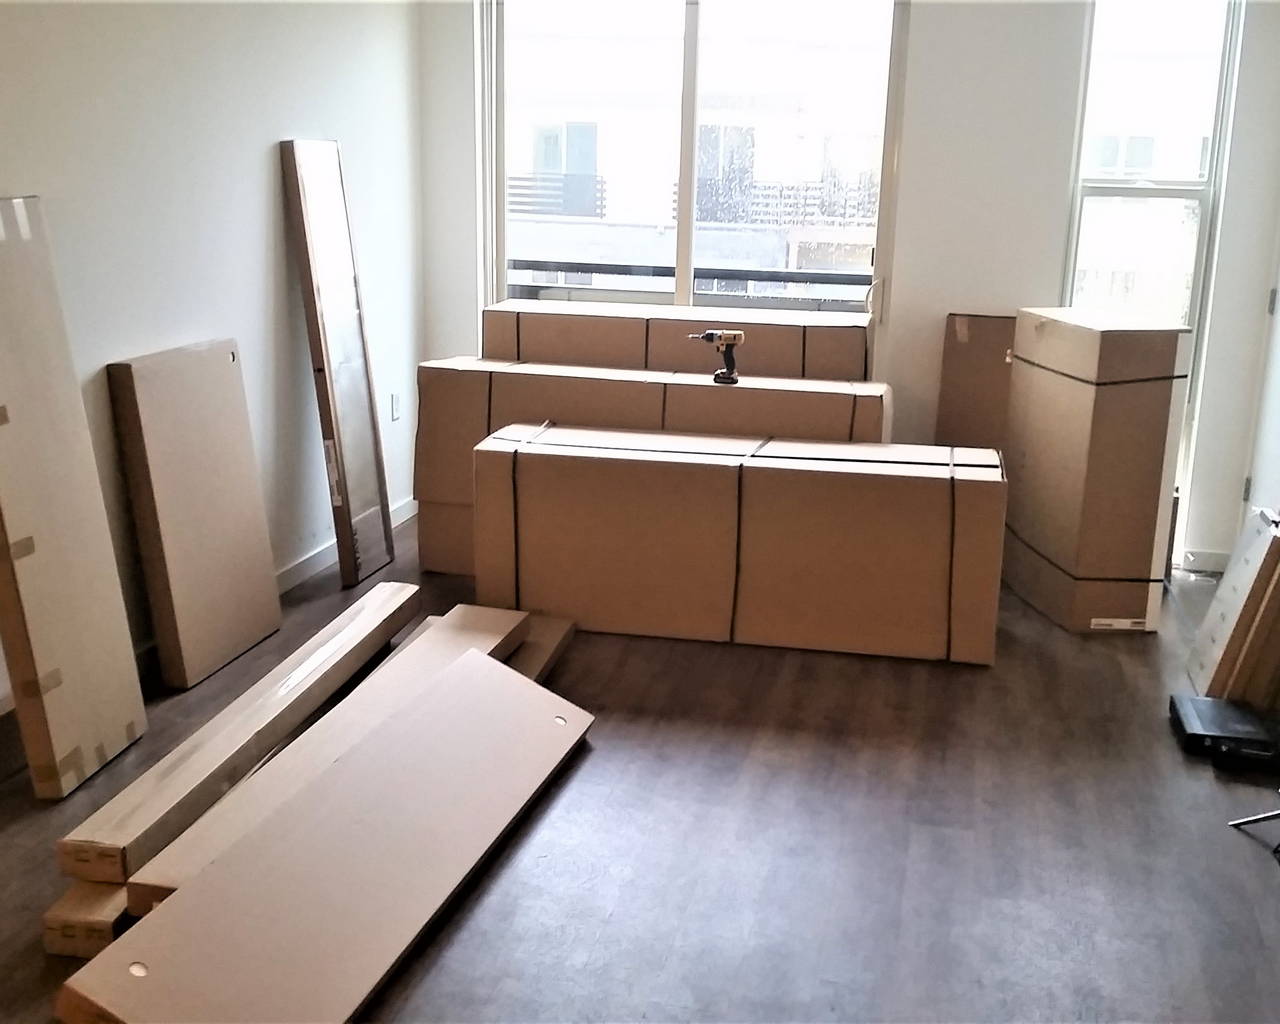 IKEA furniture delivery and assembly service in New York and New Jersey